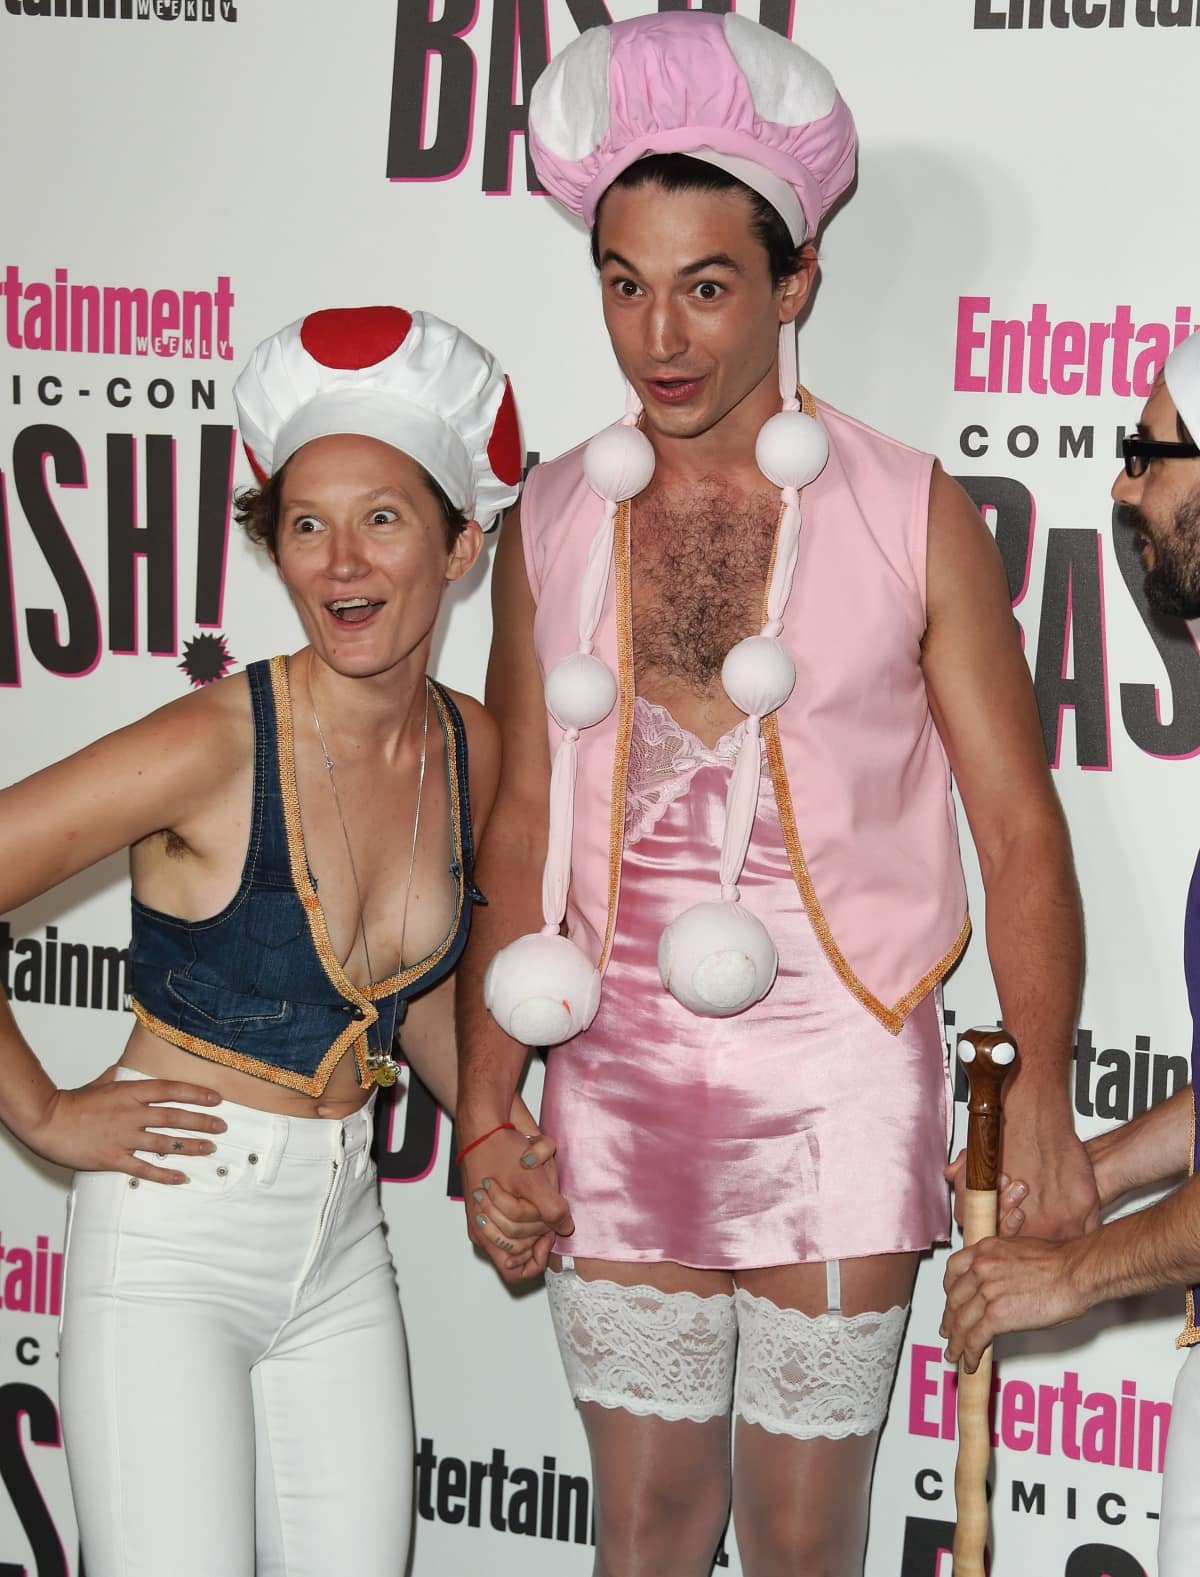 Ezra Miller cosplaying as Toadette at the Entertainment Weekly Comic-Con Bash 2018